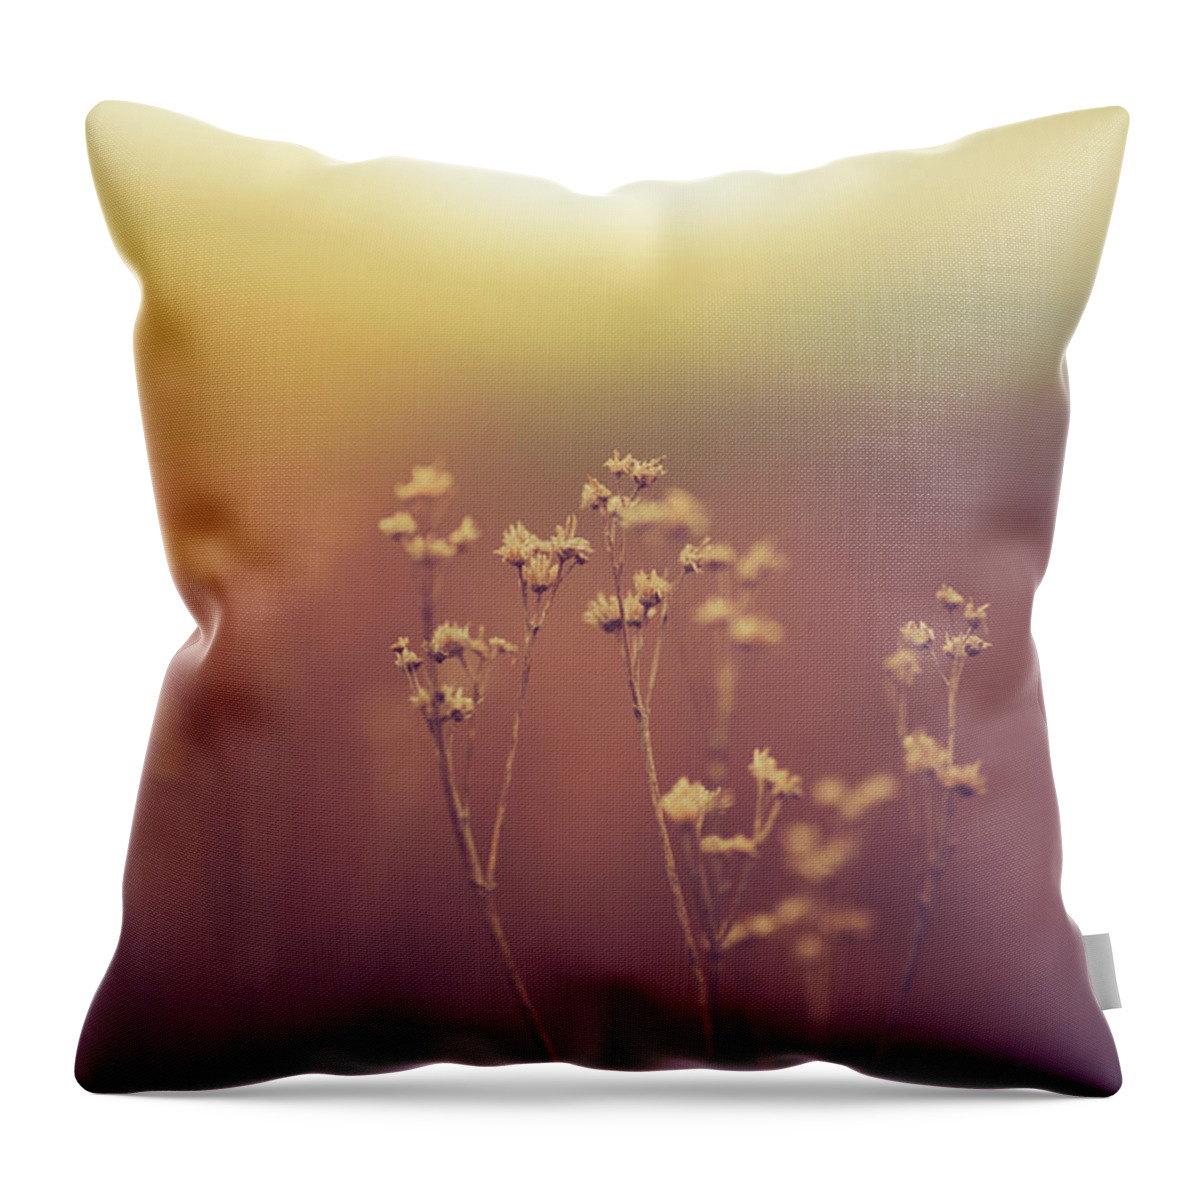  Throw Pillow featuring the photograph Souls Of Glass by Shane Holsclaw